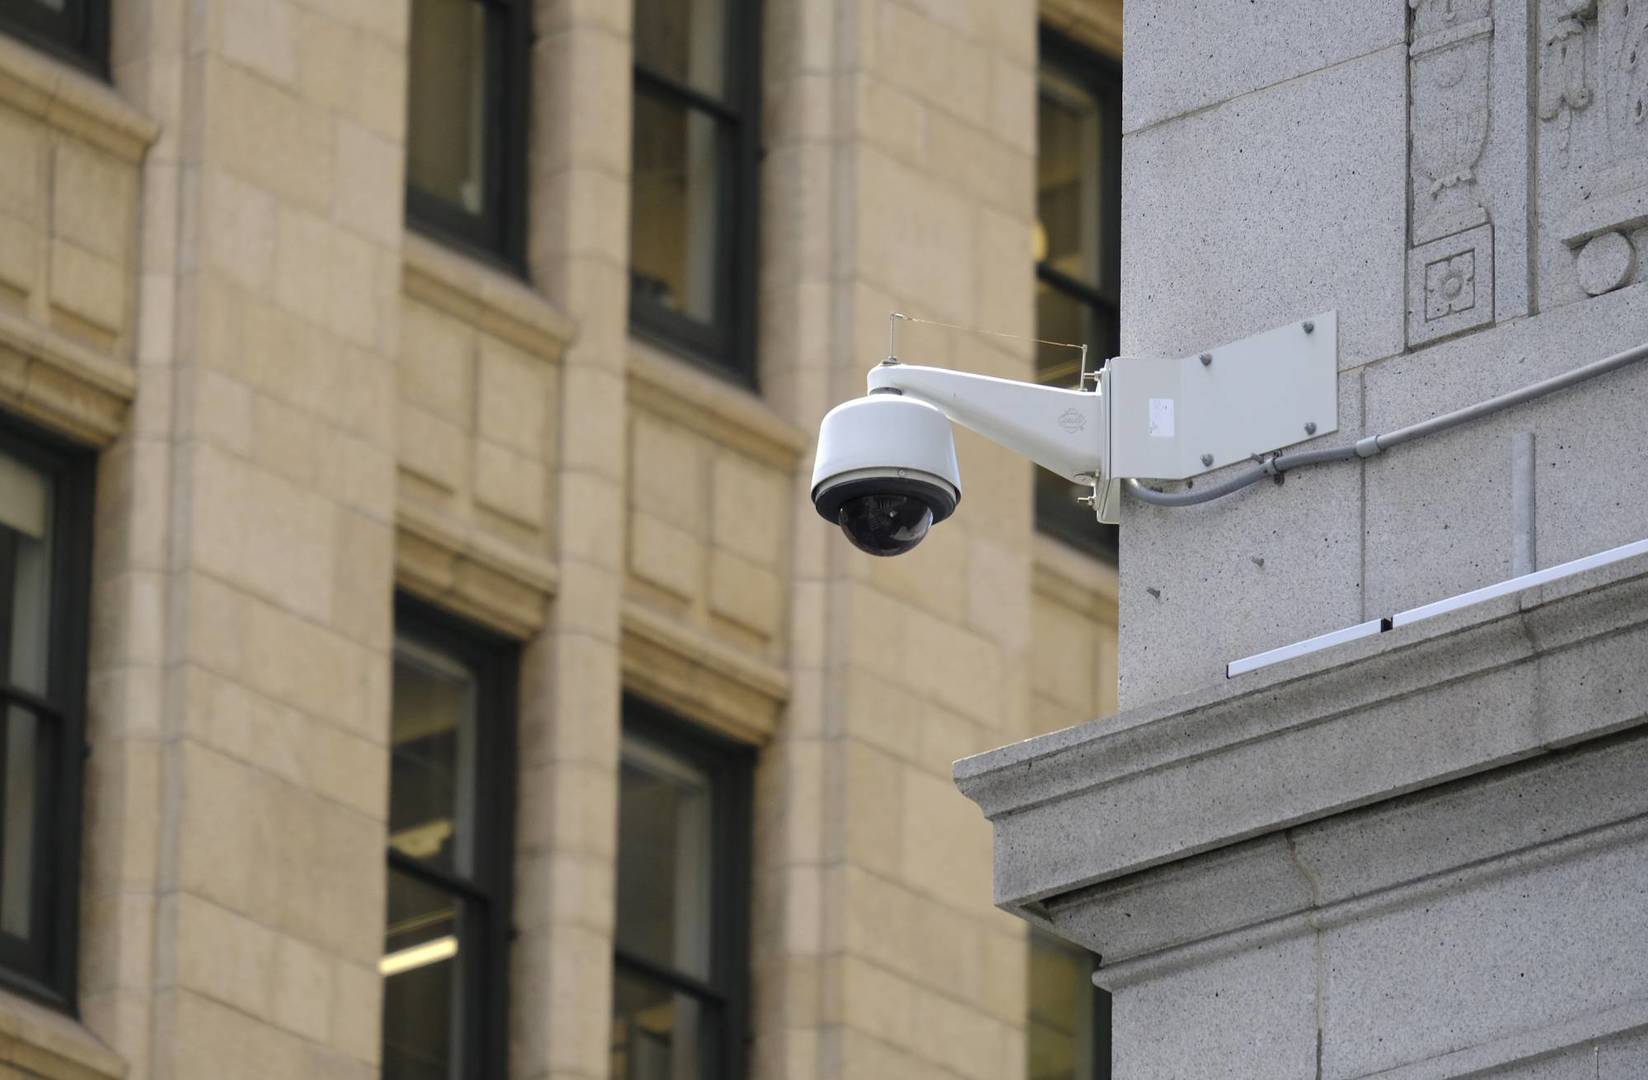 In this photo taken Tuesday, May 7, 2019, is a security camera in the Financial District of San Francisco. San Francisco is on track to become the first U.S. city to ban the use of facial recognition by police and other city agencies as the technology creeps increasingly into daily life. (AP Photo/Eric Risberg)